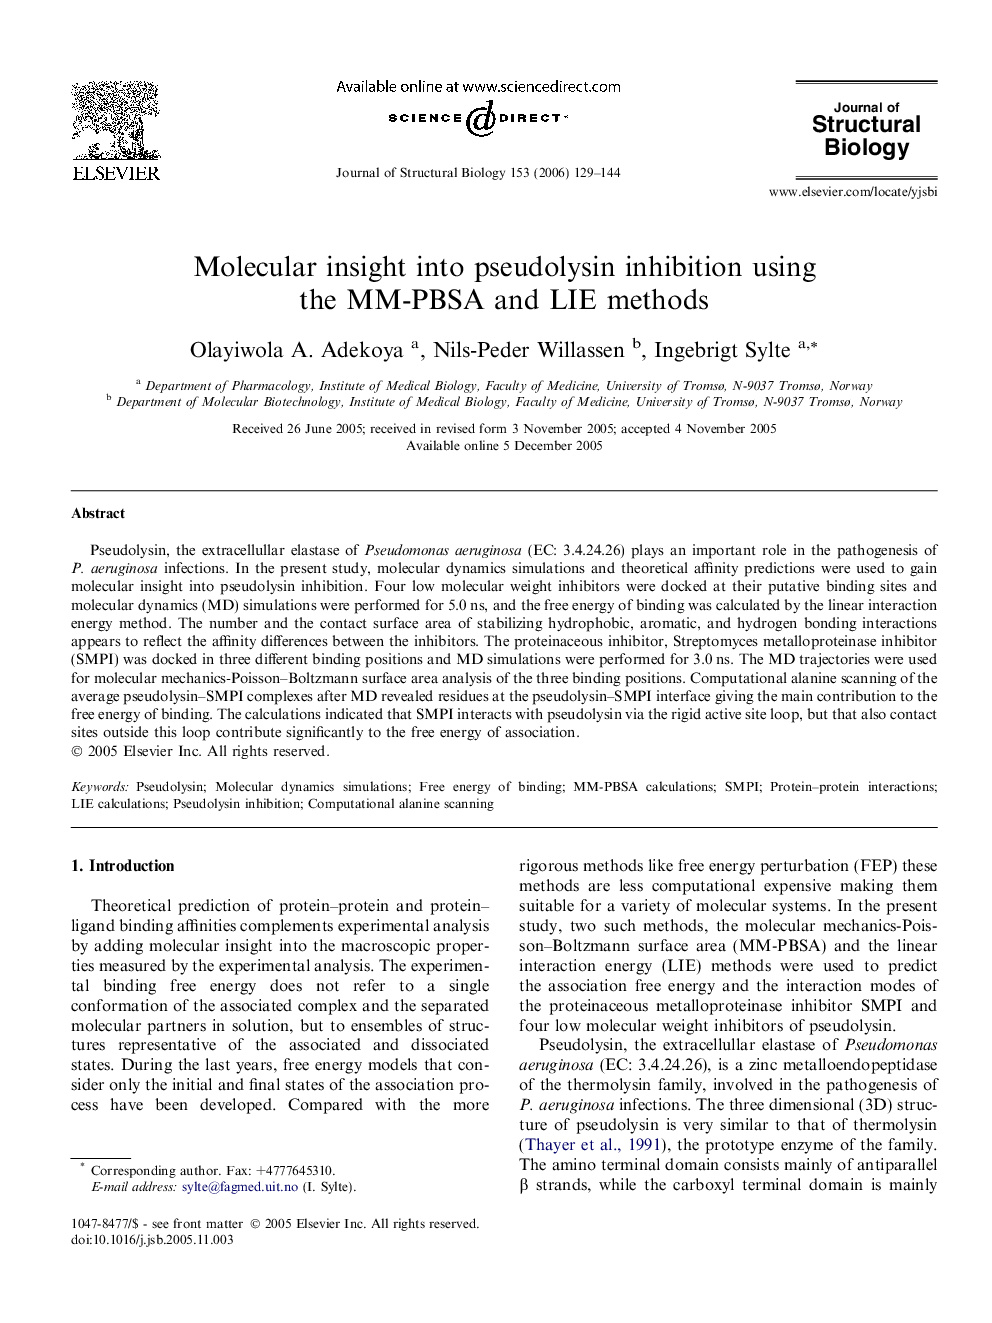 Molecular insight into pseudolysin inhibition using the MM-PBSA and LIE methods